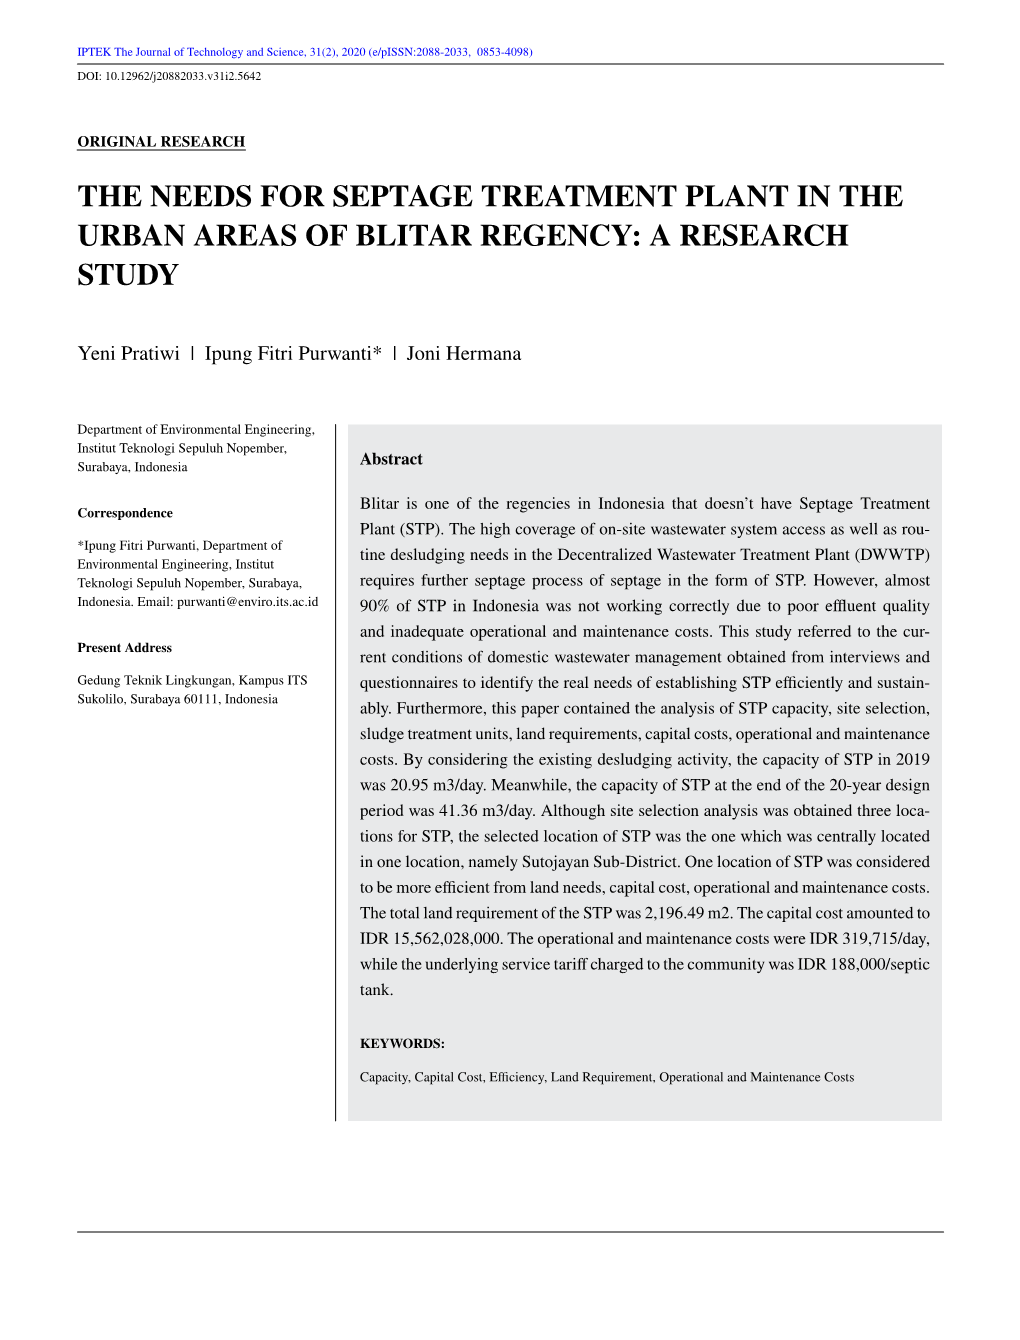 The Needs for Septage Treatment Plant in the Urban Areas of Blitar Regency: a Research Study